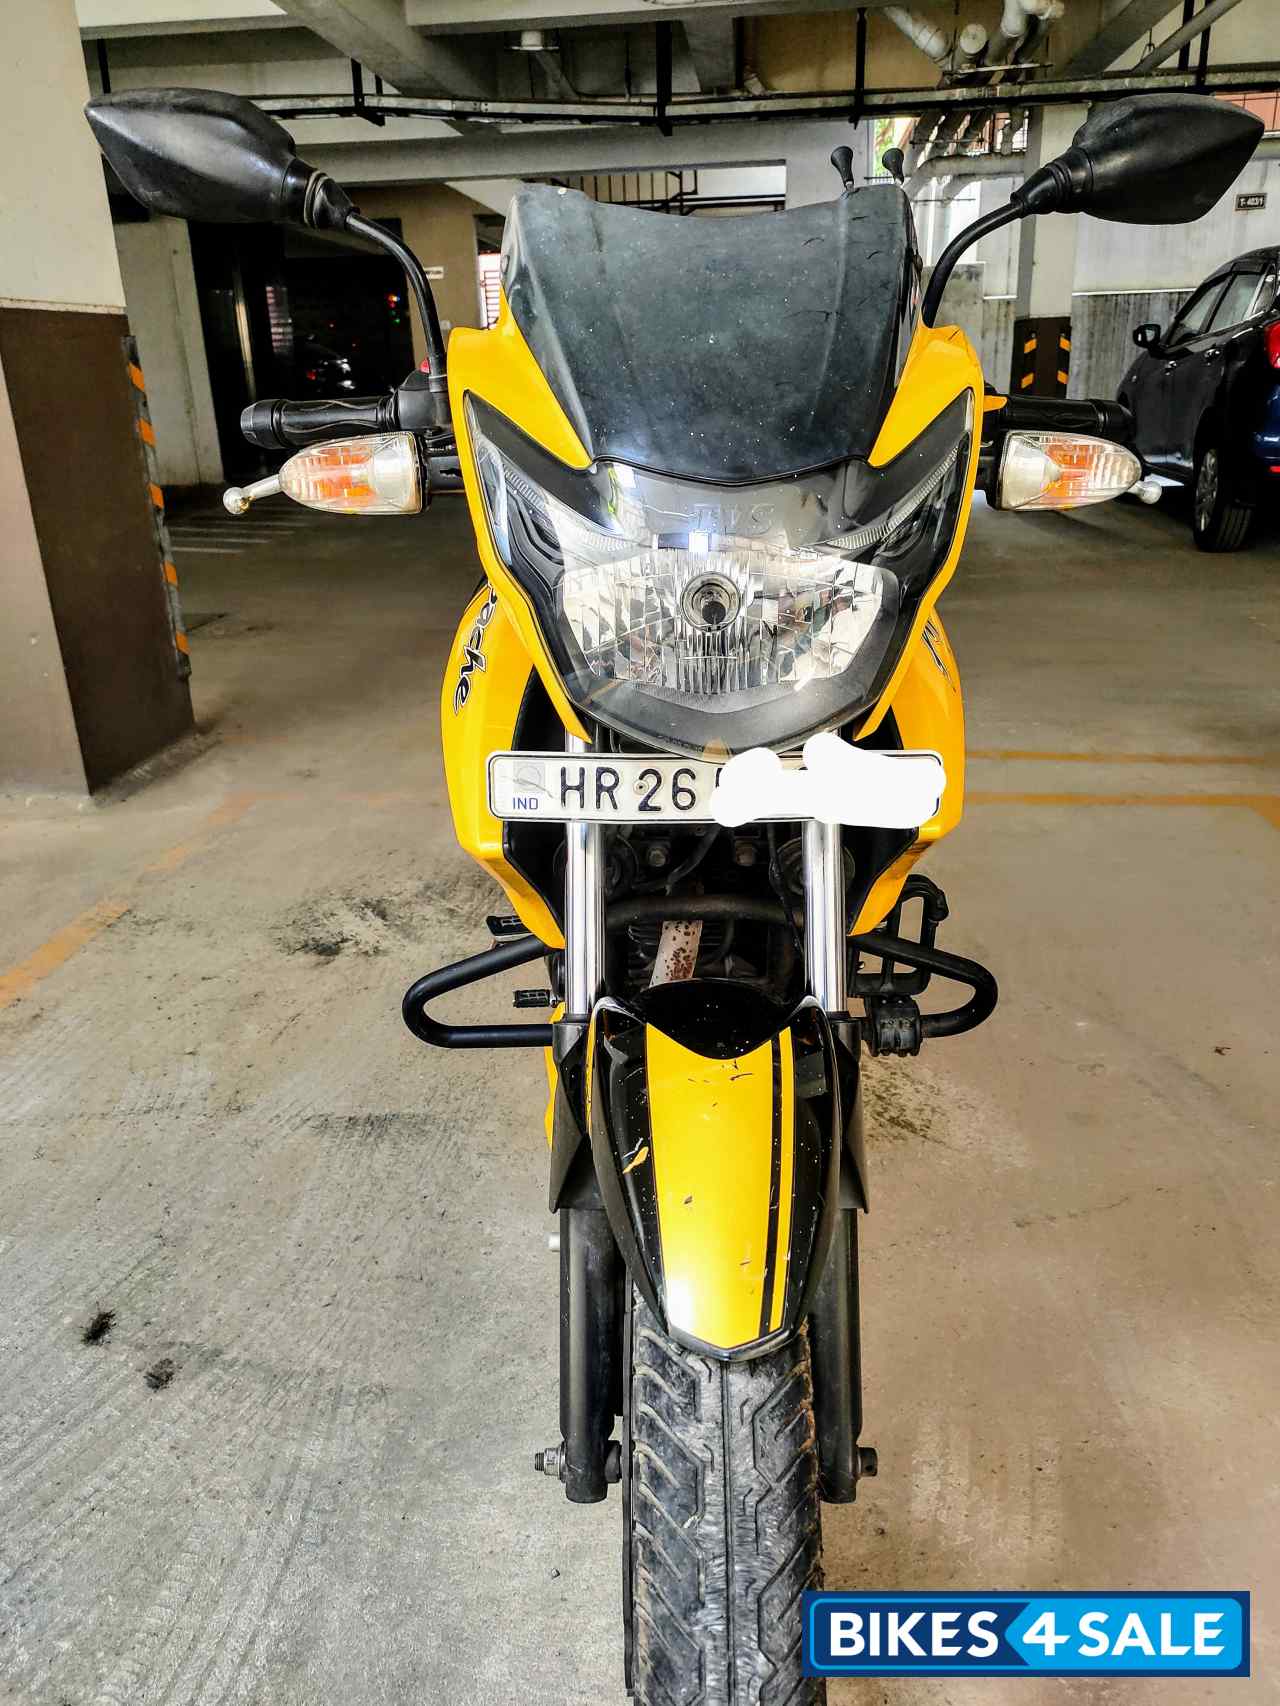 Used 12 Model Tvs Apache Rtr 160 For Sale In Bangalore Id Yellow With Black Colour Bikes4sale